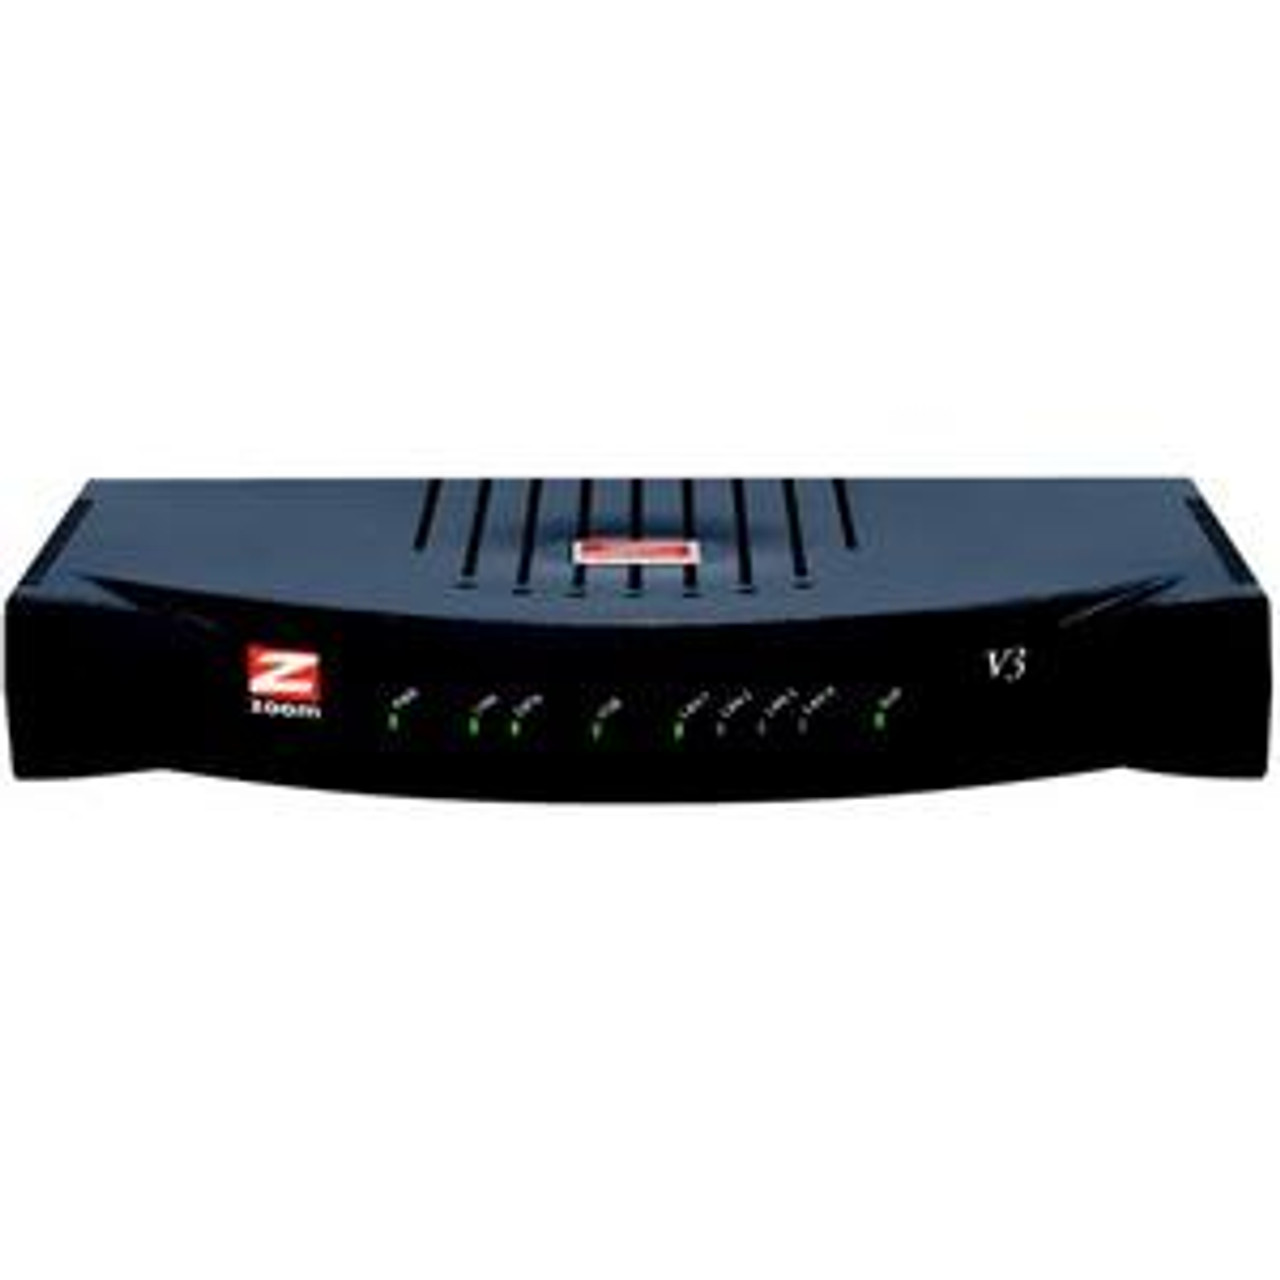 5567-00-00 Zoom 5567 Integrated Services Router 1 x FXS, 1 x USB, 1 x 10/100Base-TX WAN, 4 x 10/100Base-TX LAN (Refurbished)